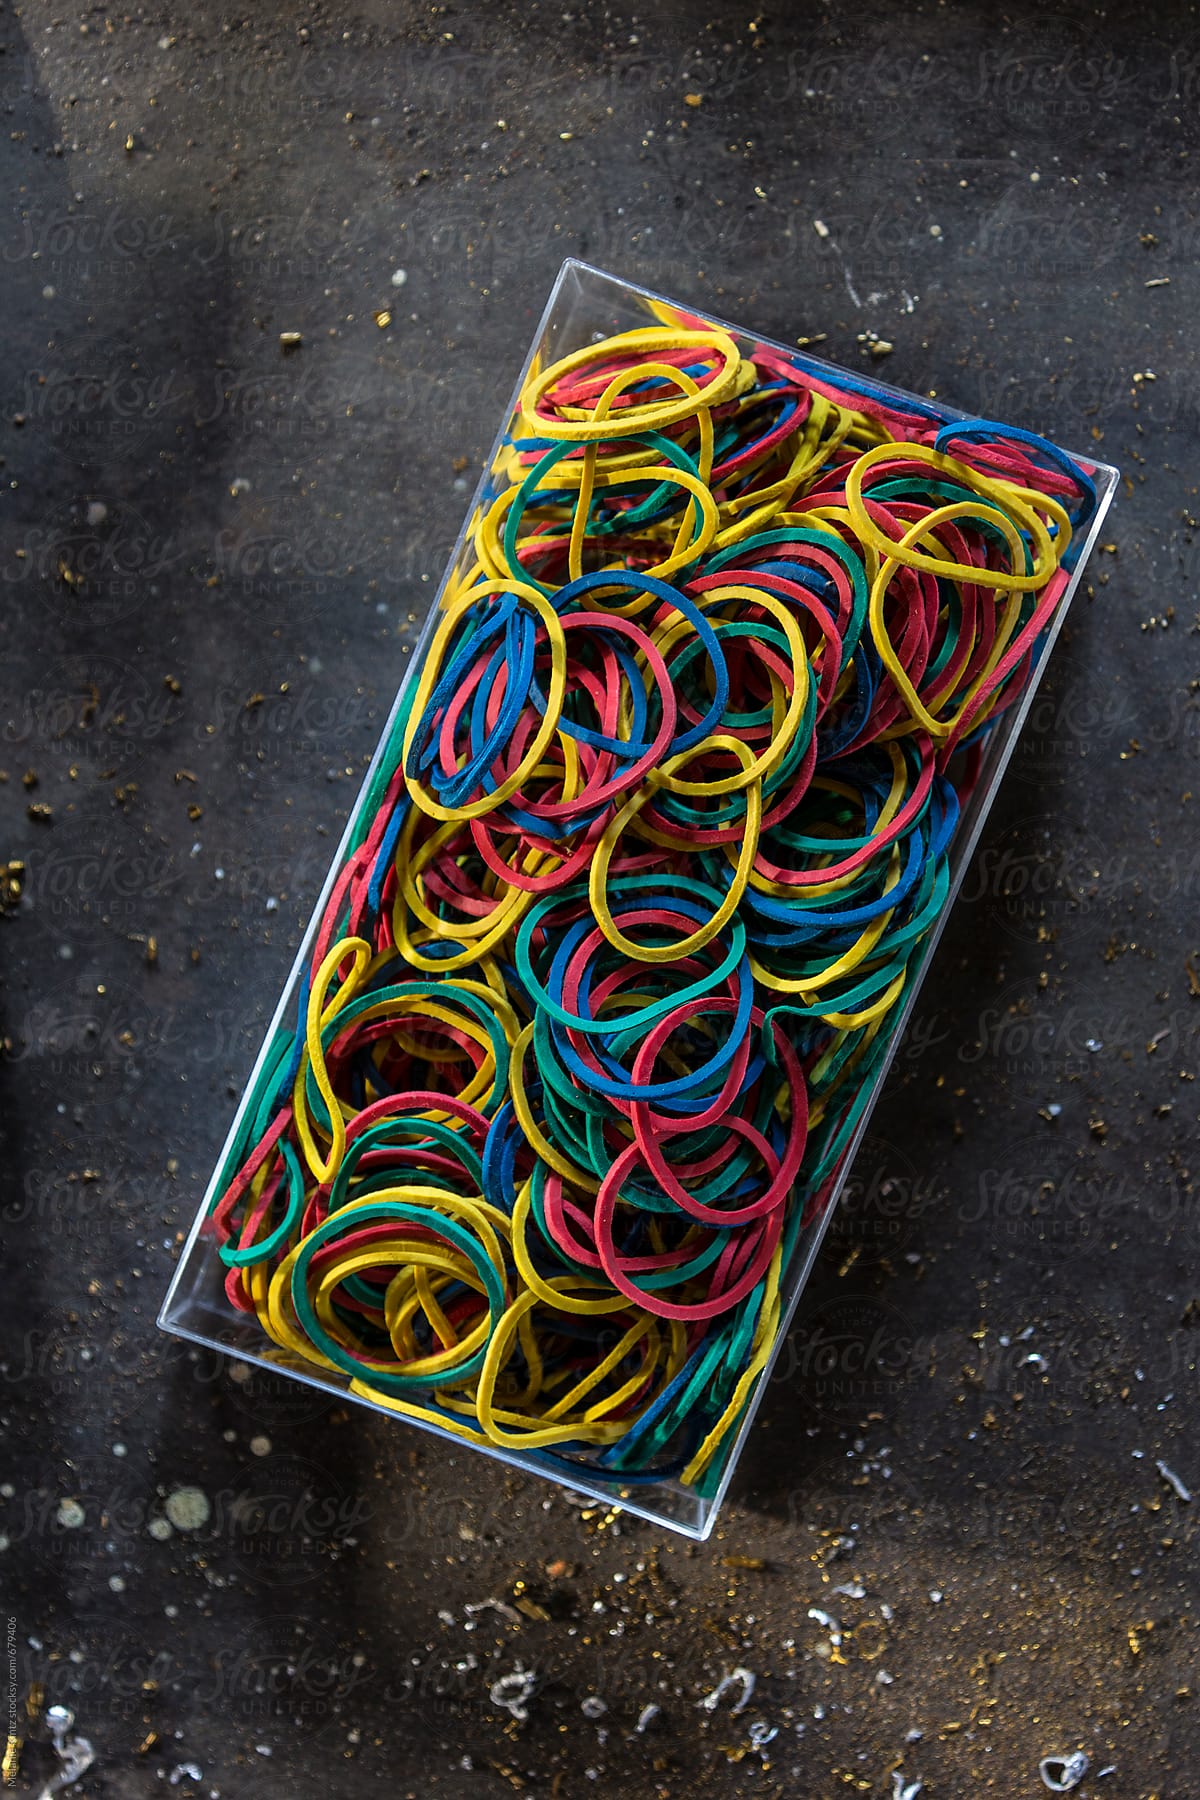 Colorful rubber bands in a box on dark metal background